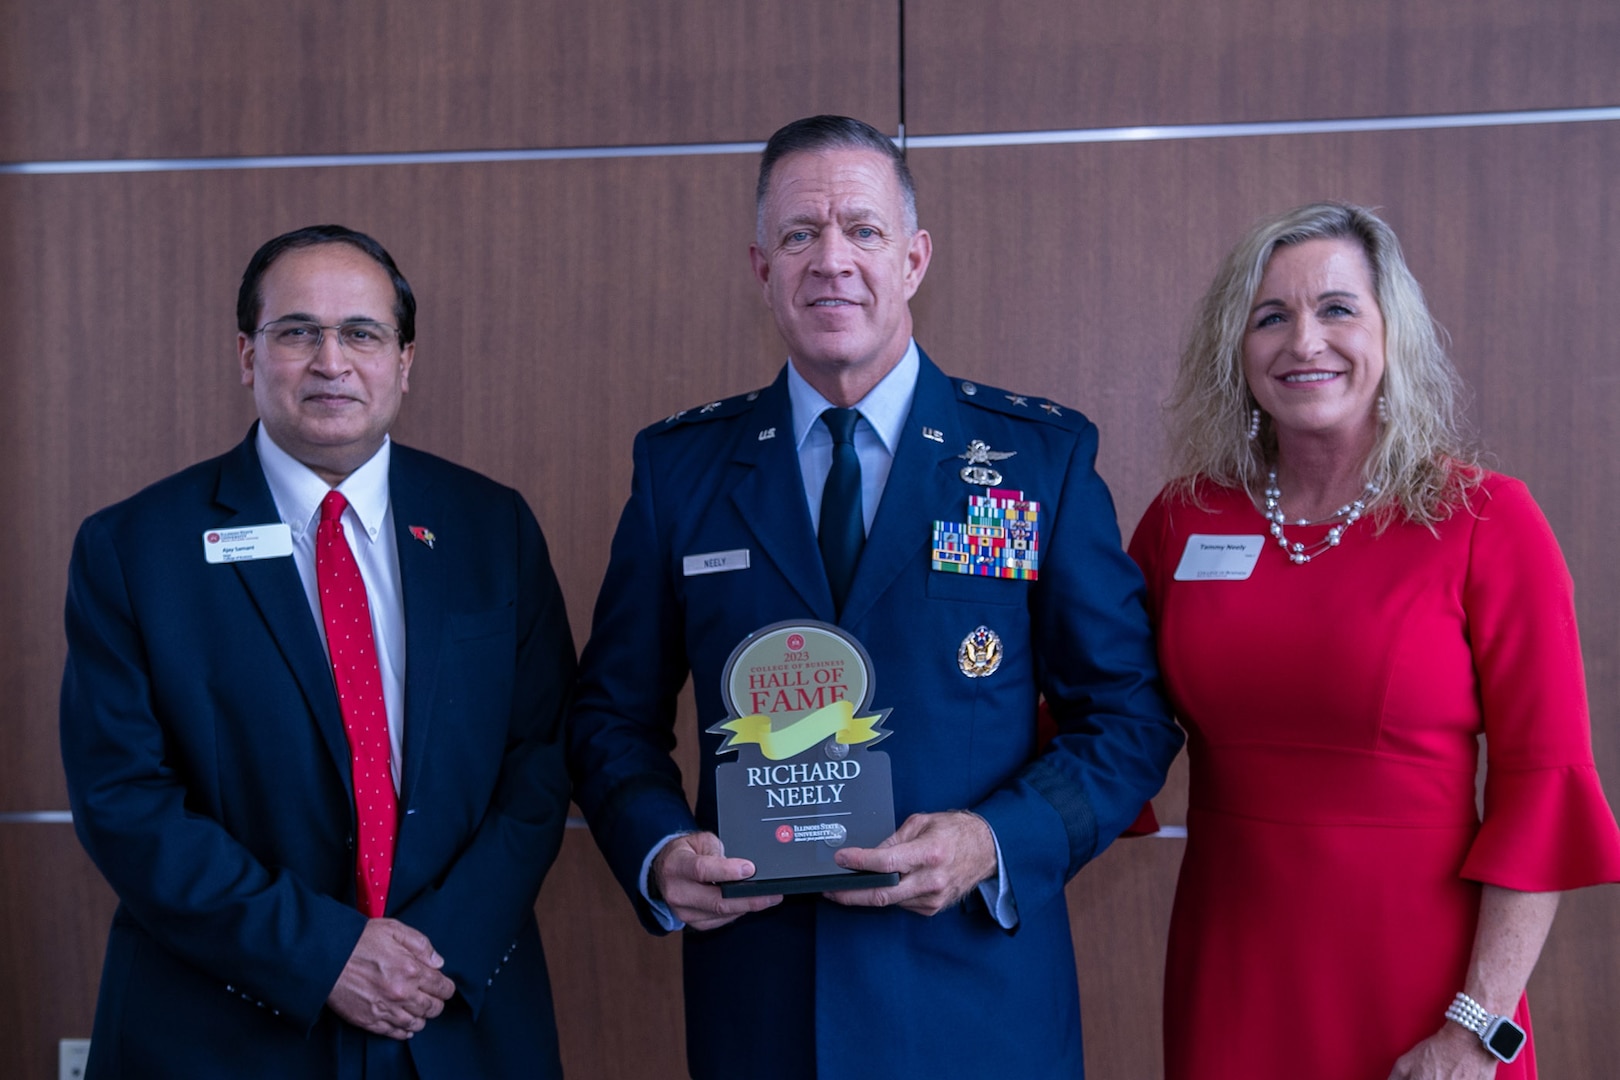 Ajay Samant, Dean of the Illinois State University College of Business, presents Maj. Gen. Rich Neely, the Adjutant General of Illinois and Commander of the Illinois National Guard, with the Hall of Fame award during the induction ceremony Feb. 23 at the ISU campus in Normal, Illinois.